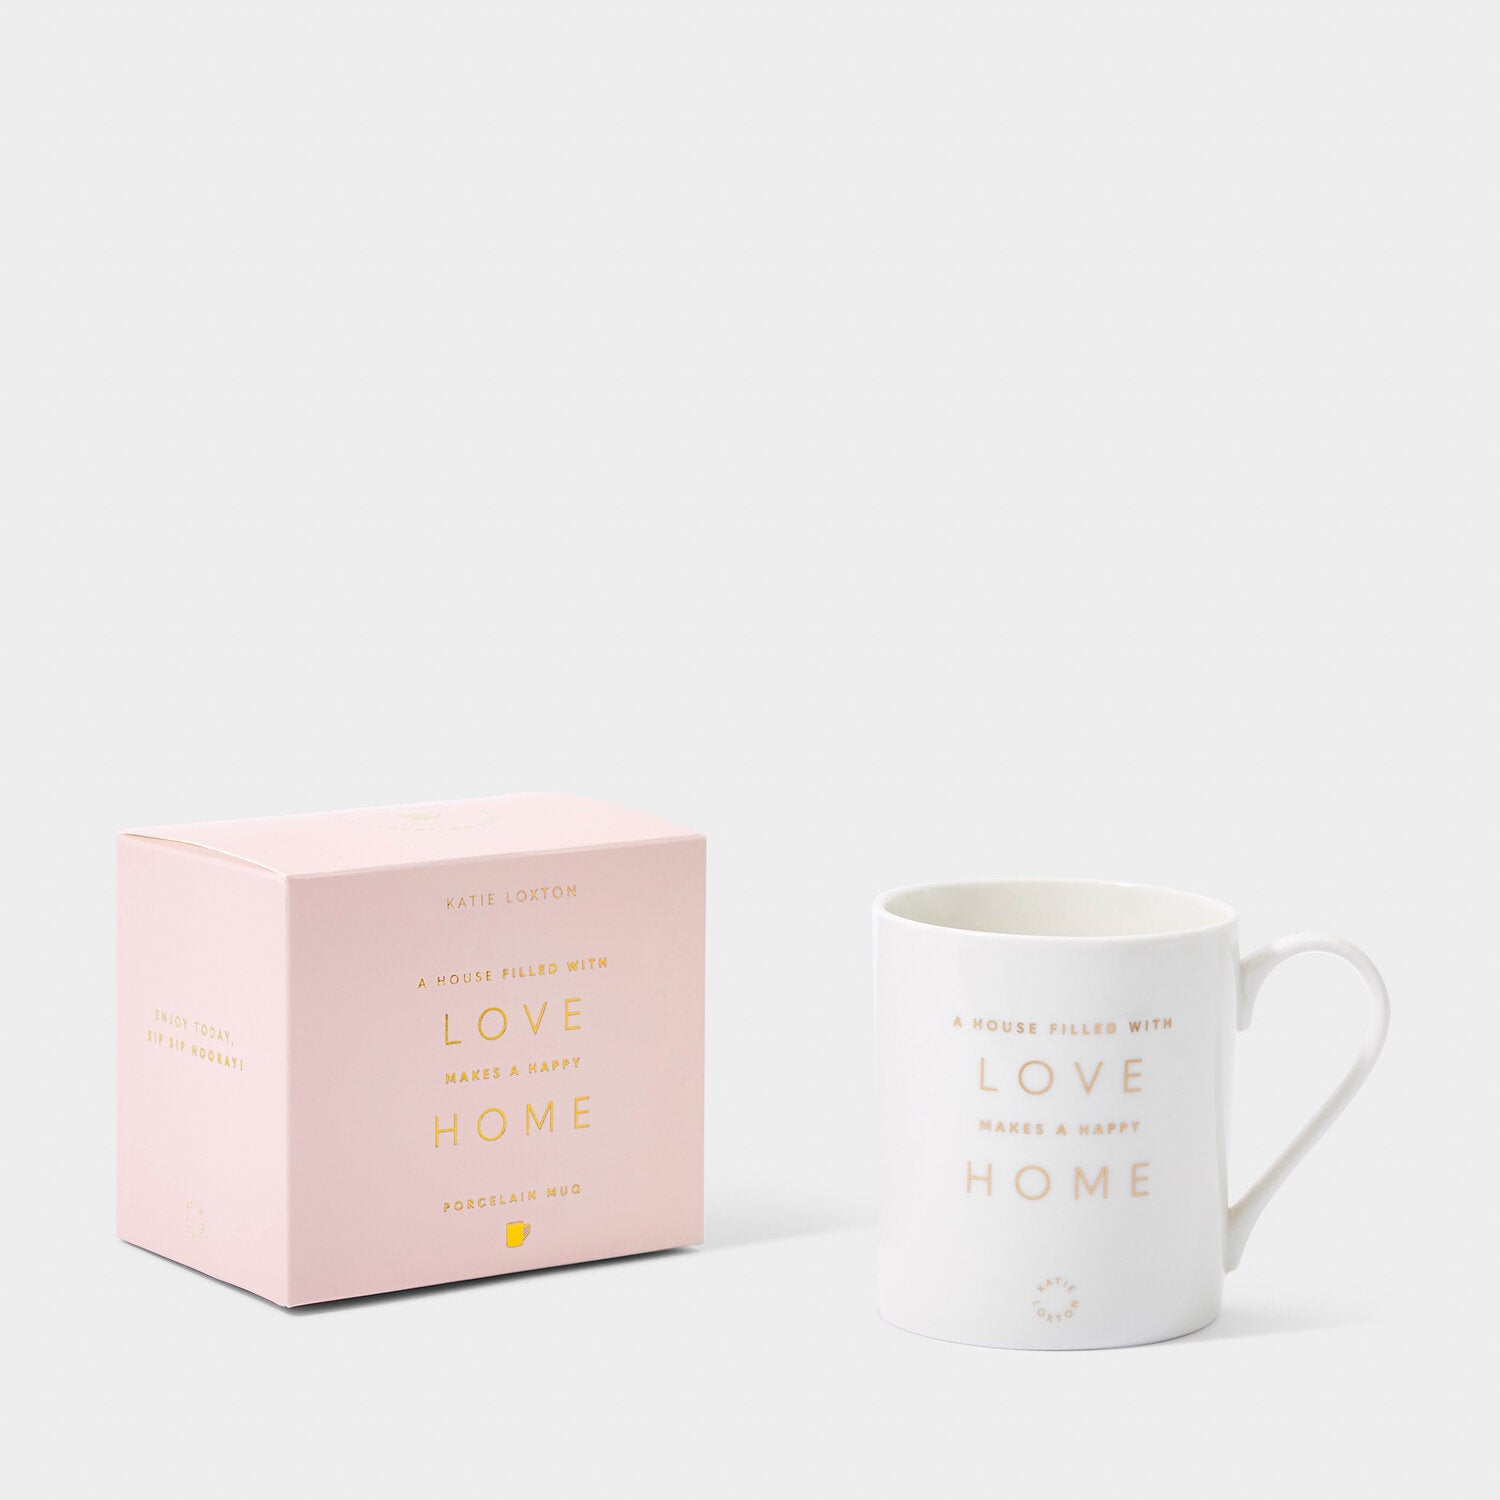 Porcelain Mug - A House Filled With Love Makes A Happy Home